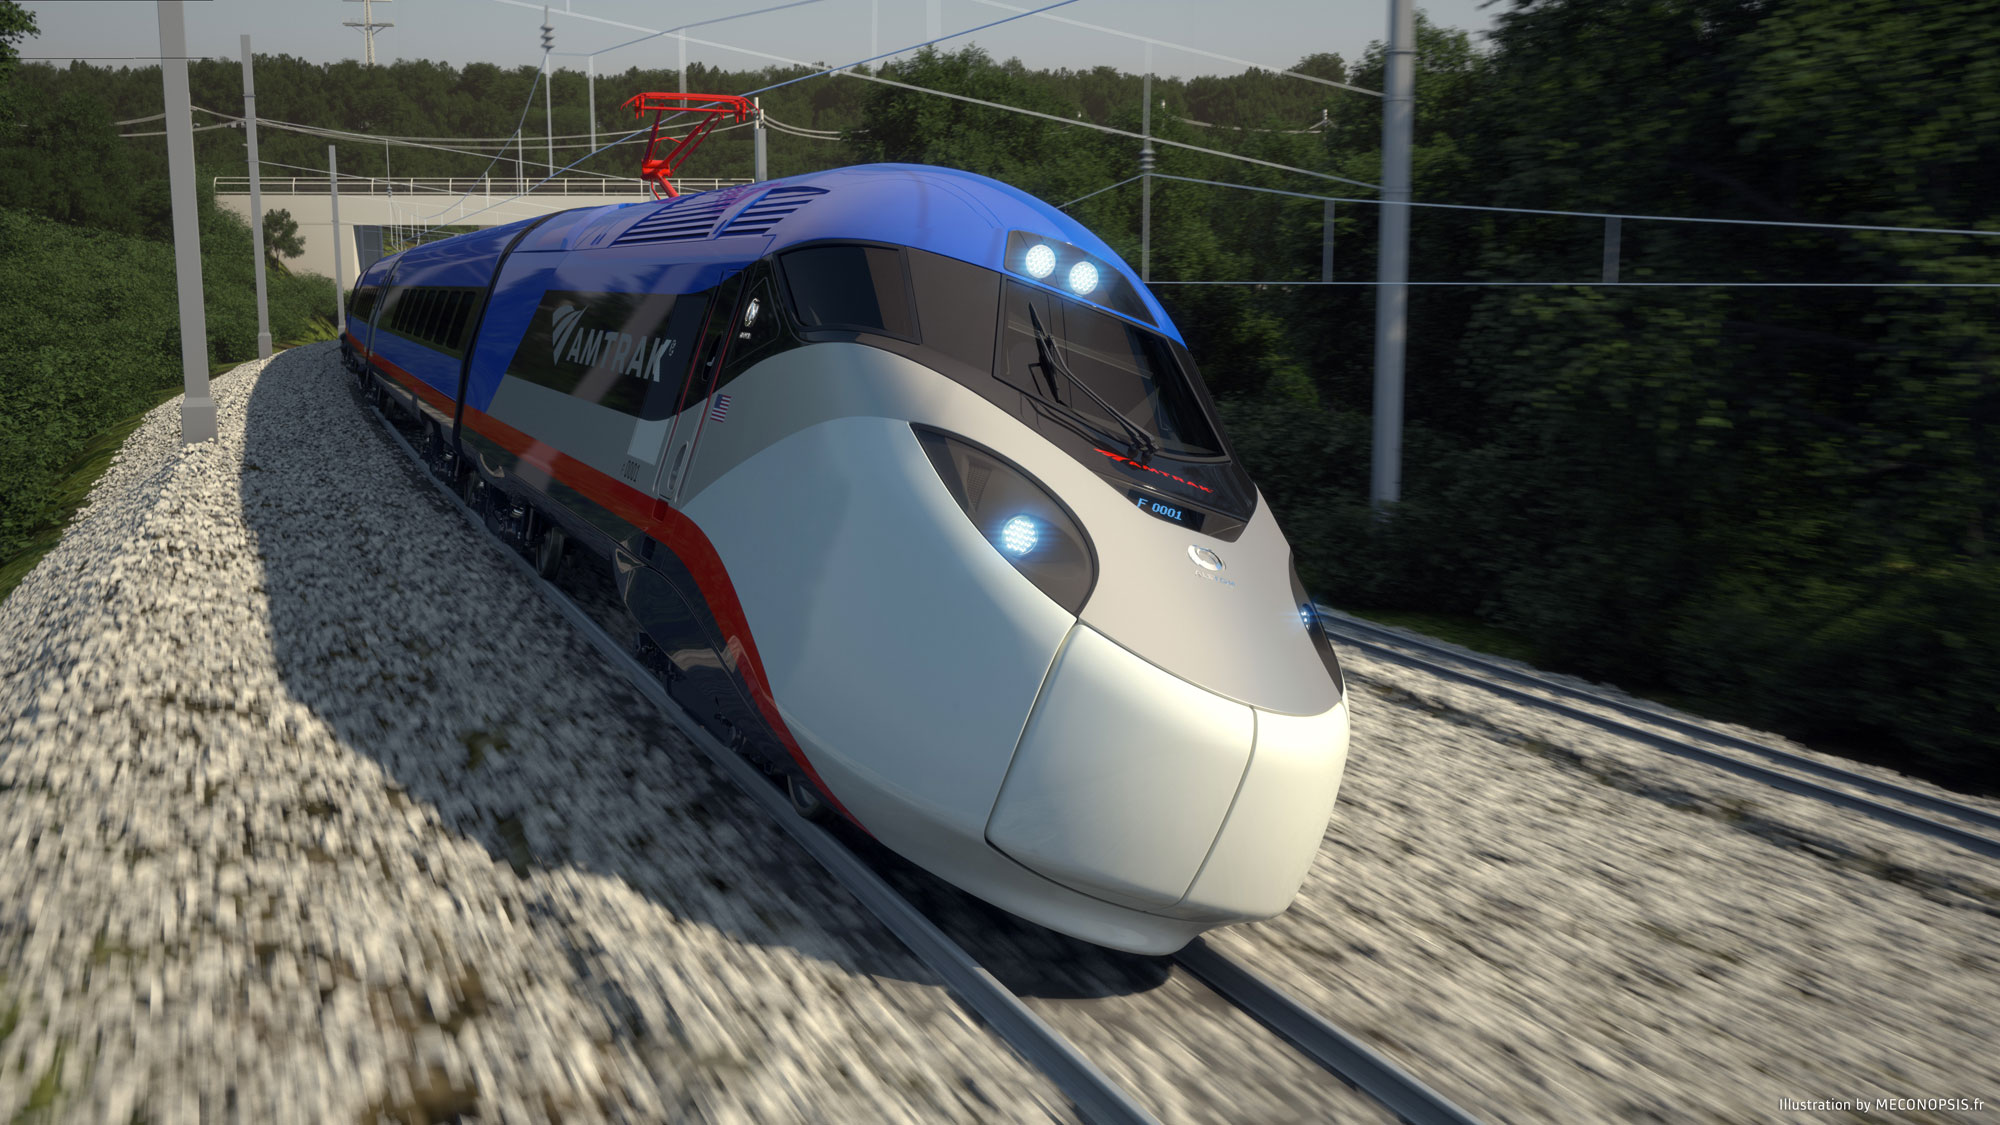 © Alstom SA, 2016 © Meconopsis by Trimaran. All rights reserved. Avelia Liberty high-speed train.